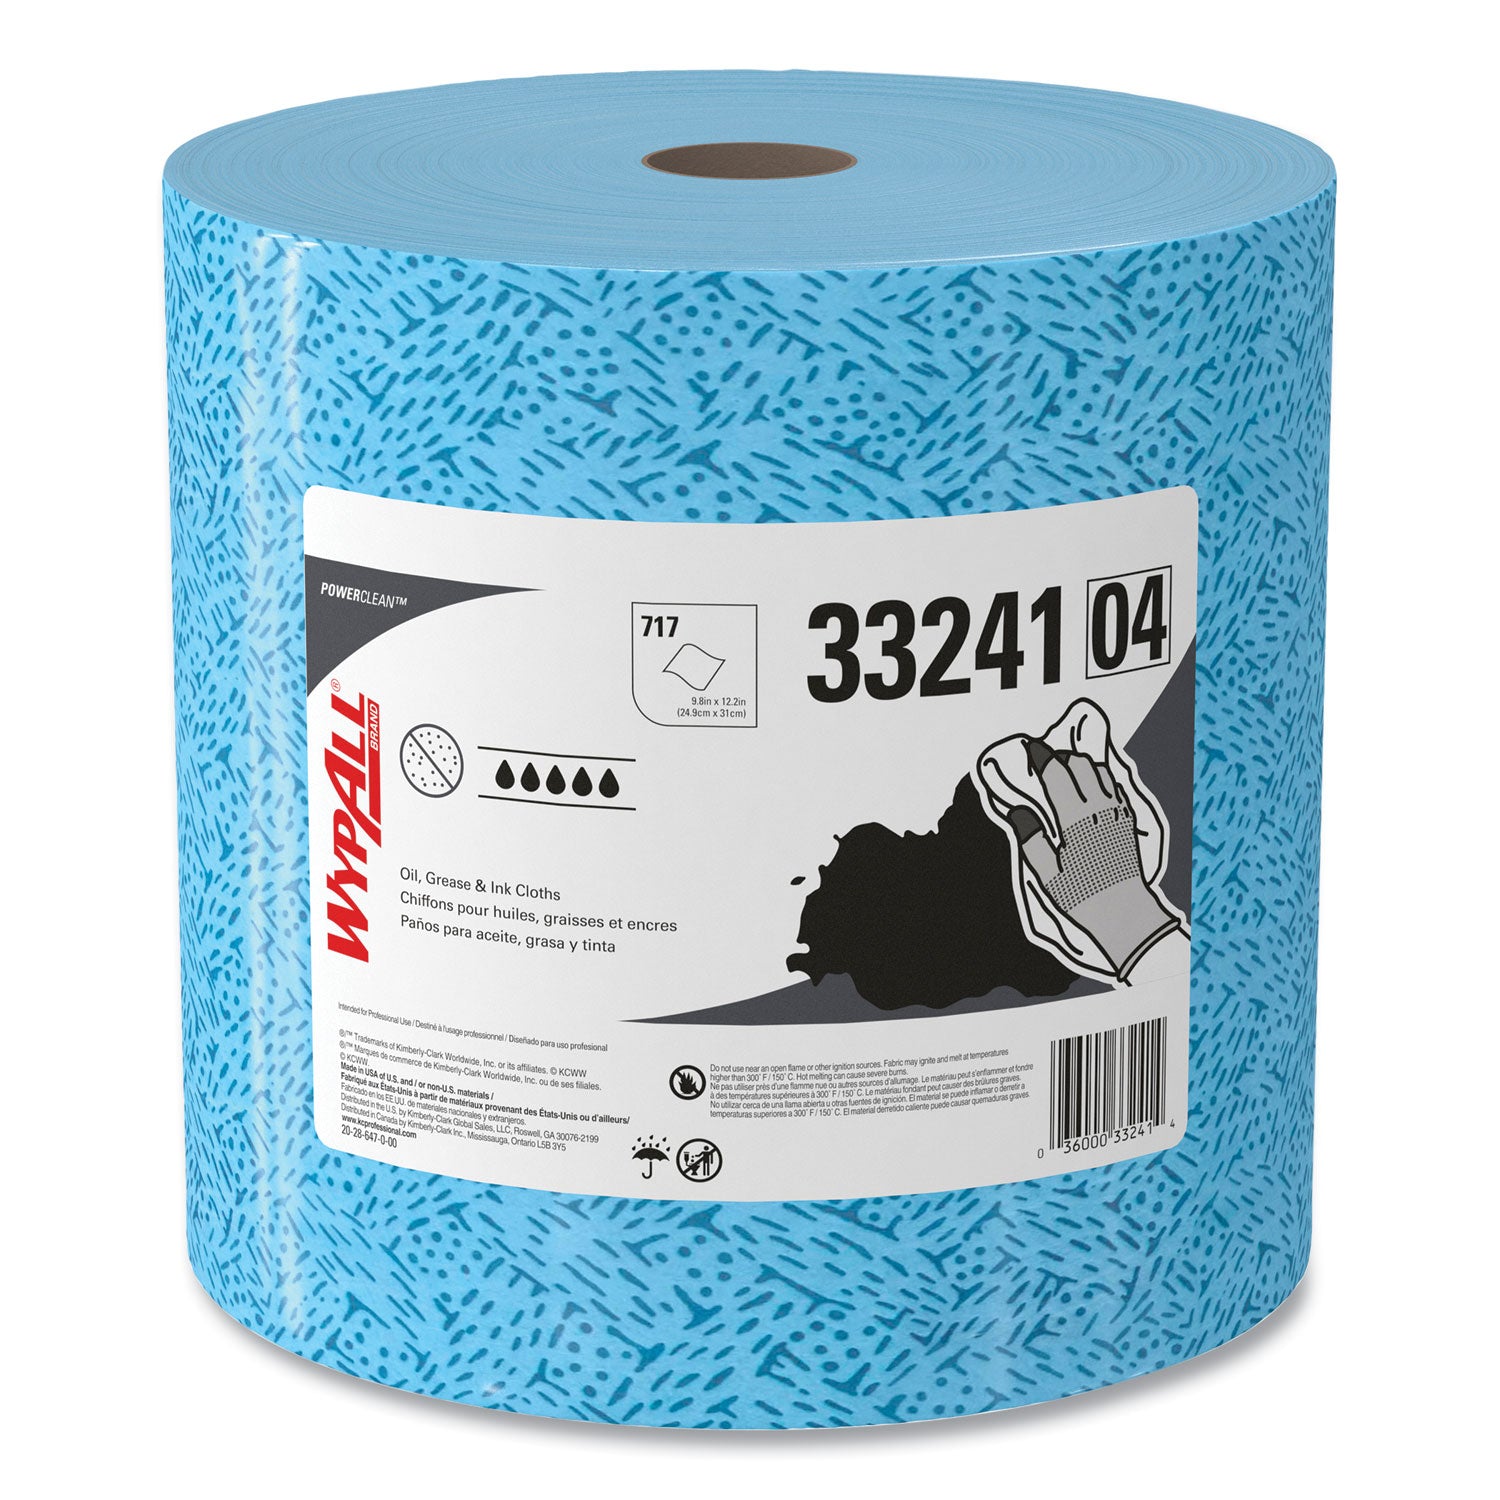 oil-grease-and-ink-cloths-jumbo-roll-98-x-122-blue-717-roll_kcc33241 - 1